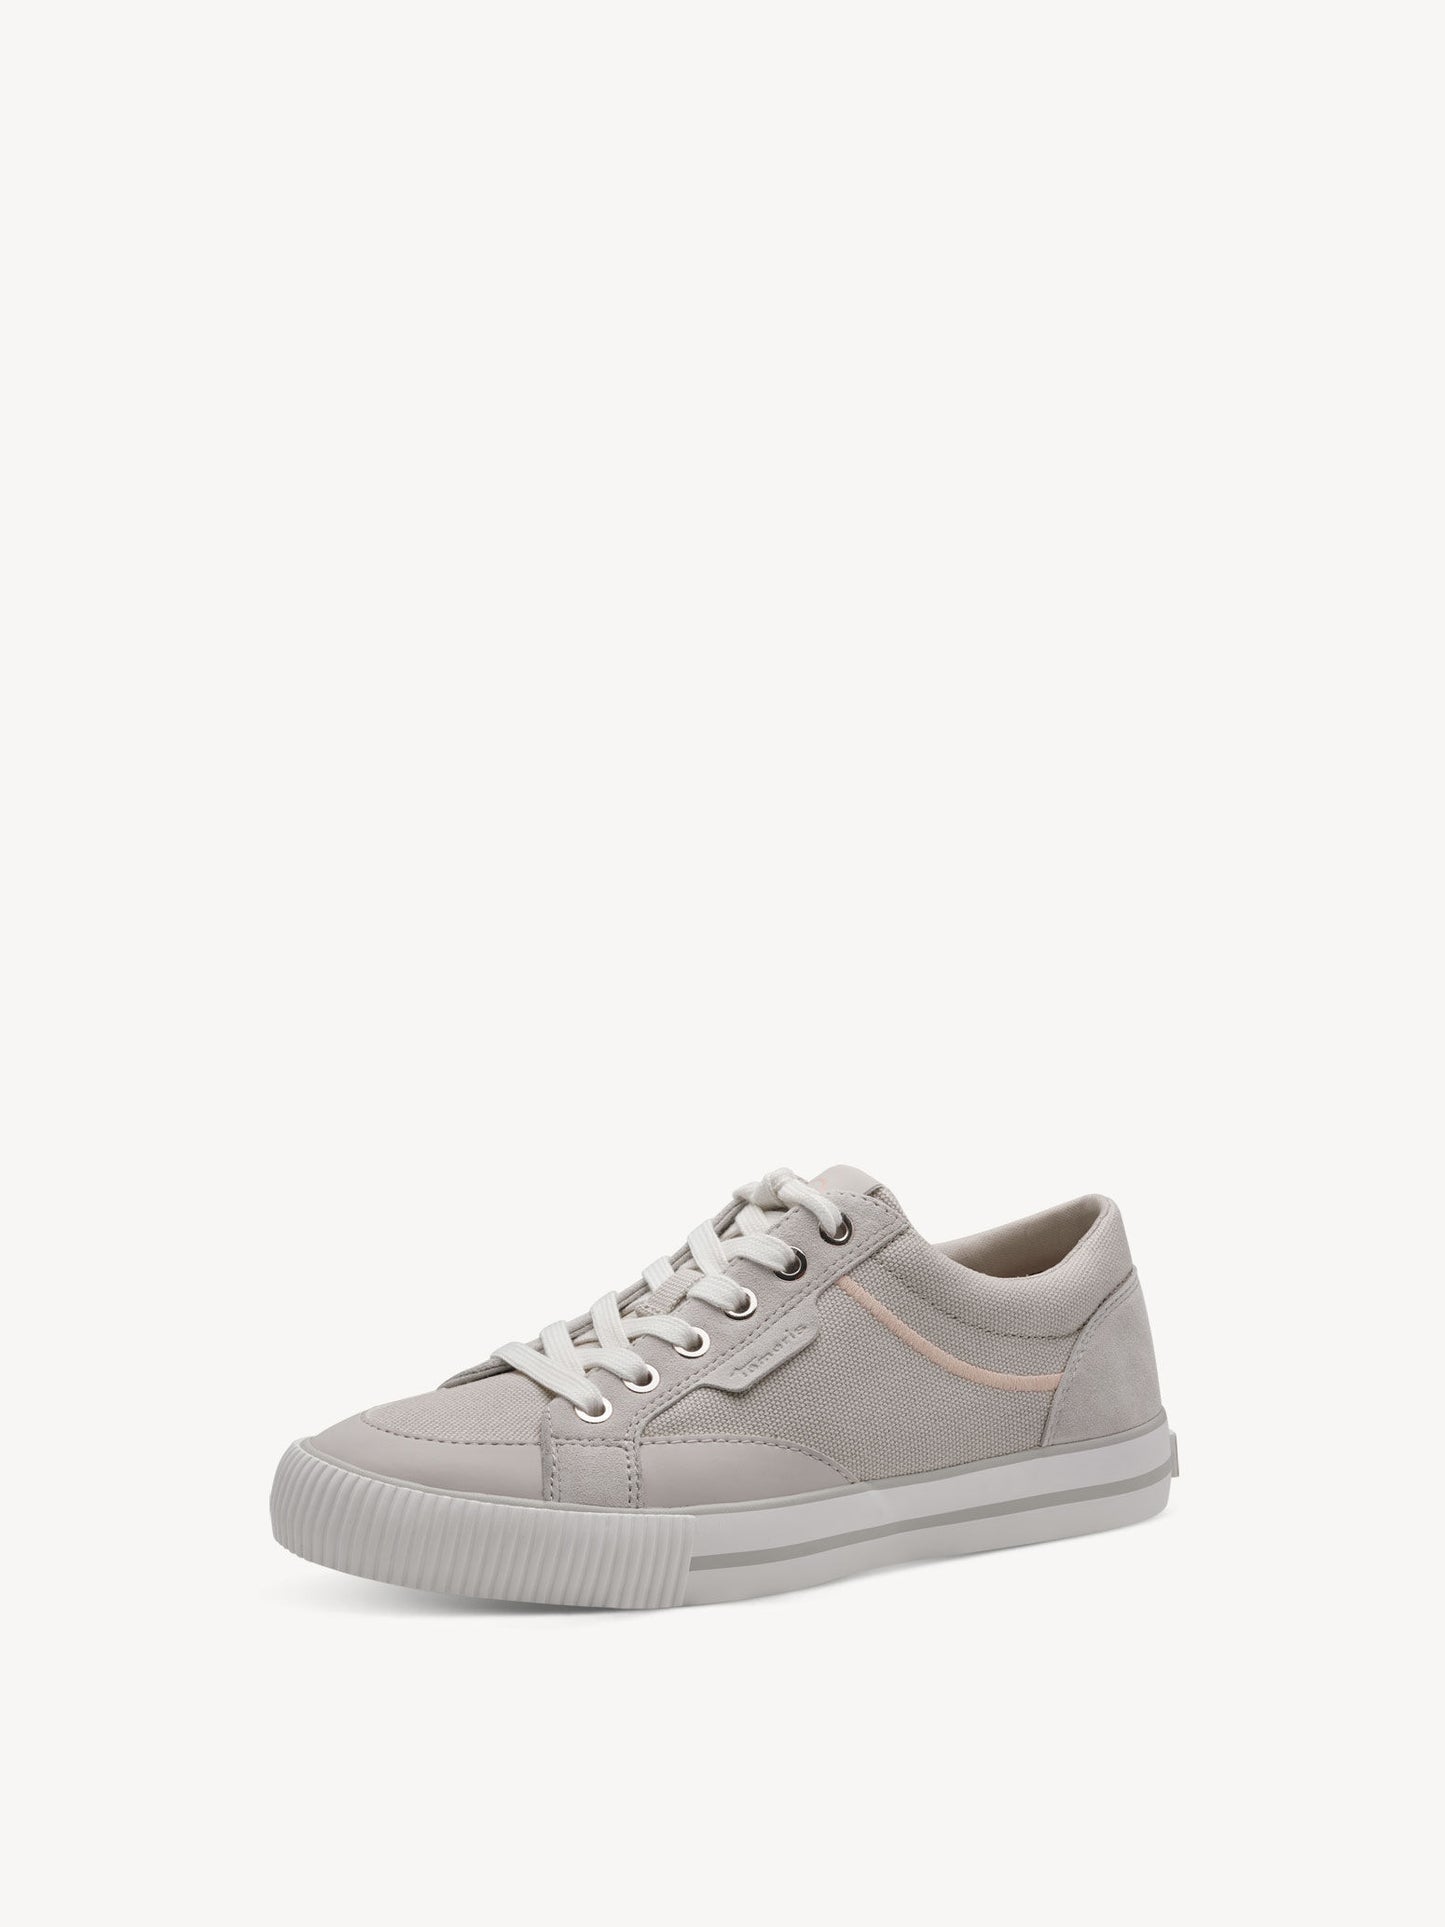 Tamaris Women's 1-23607-42 Leather Lace-Up Sneakers Ivory